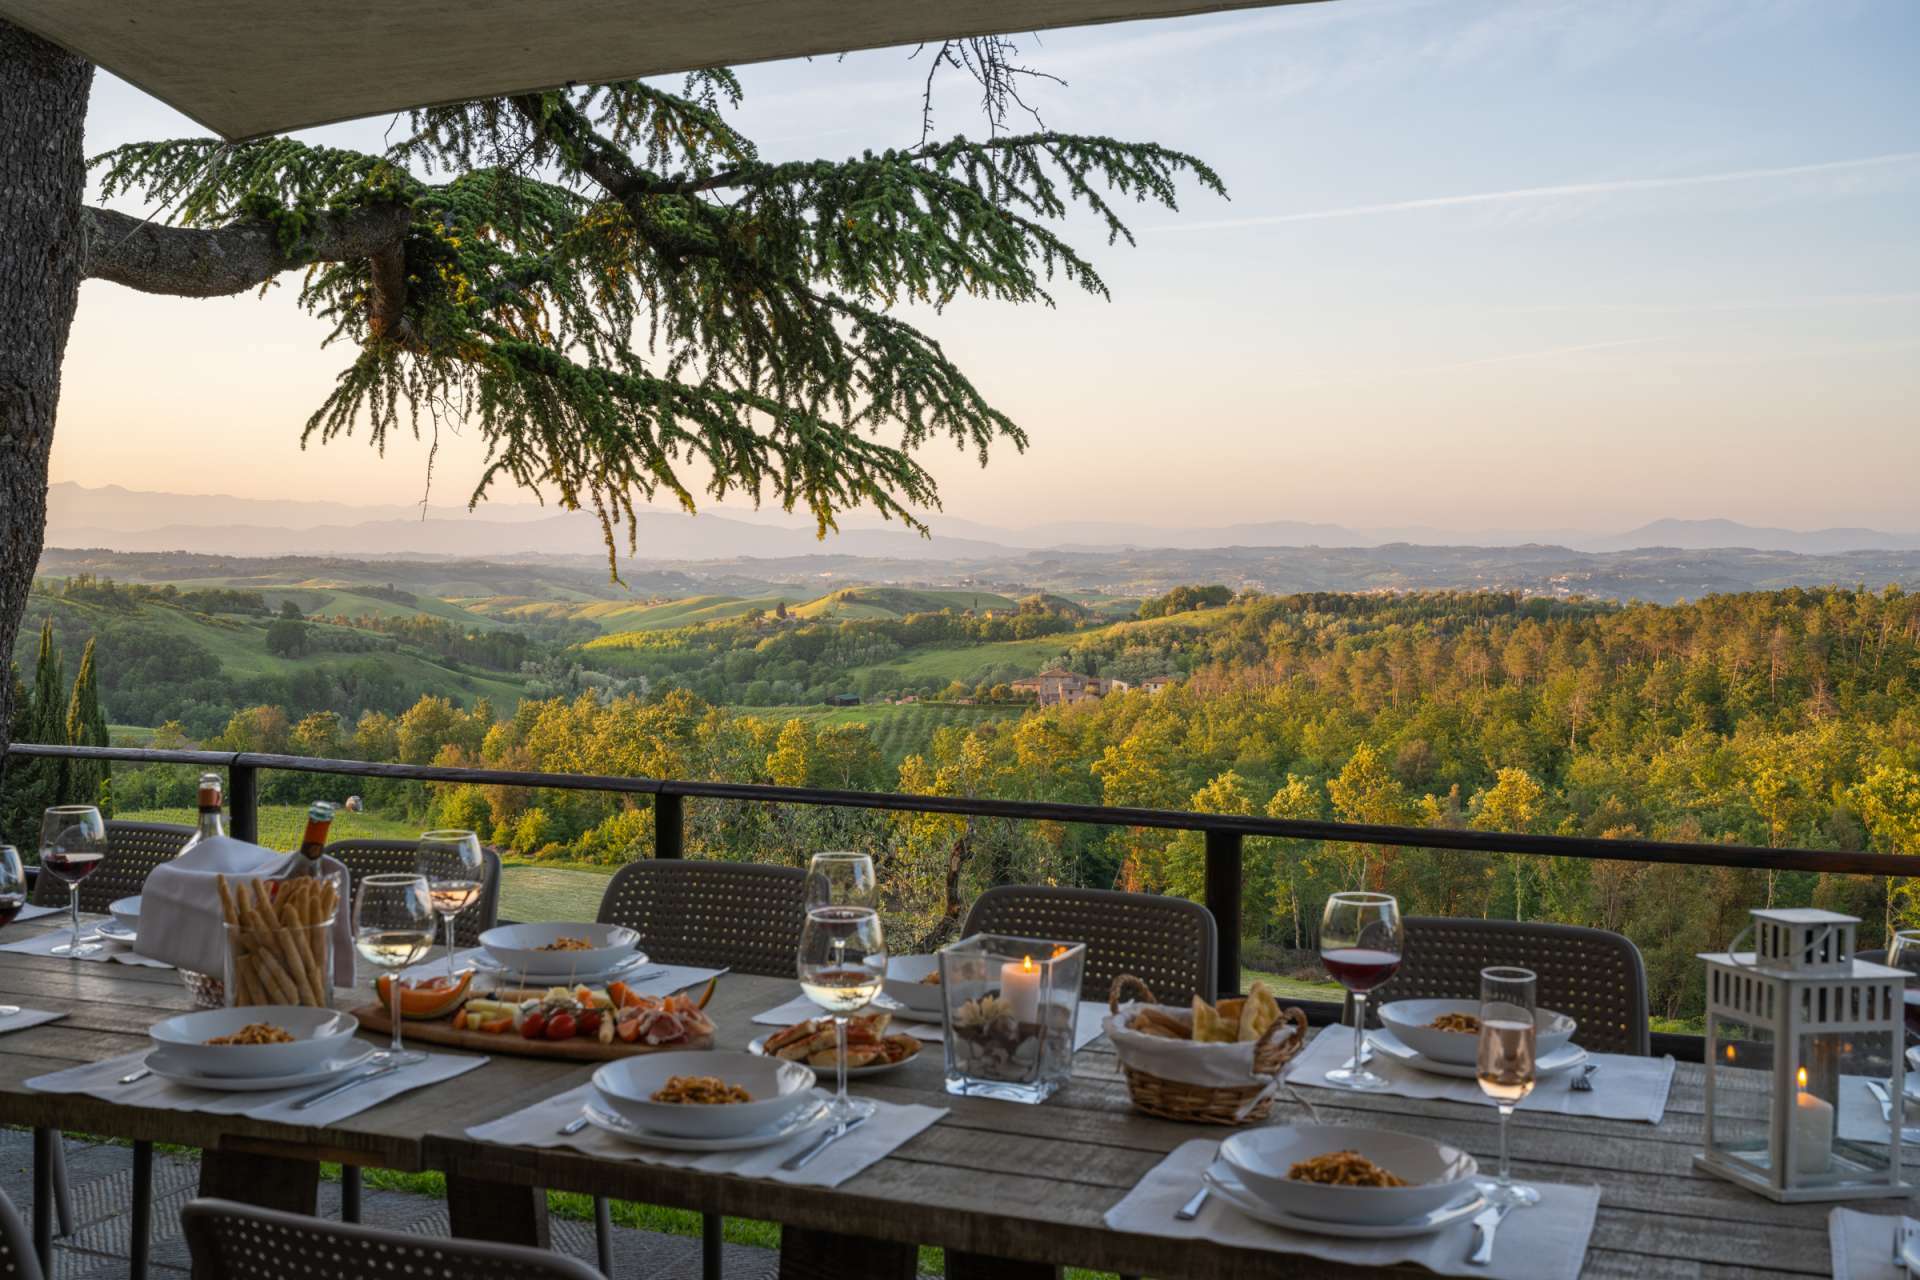 Luxury Group Getaways: Why Tuscany is the Perfect Destination